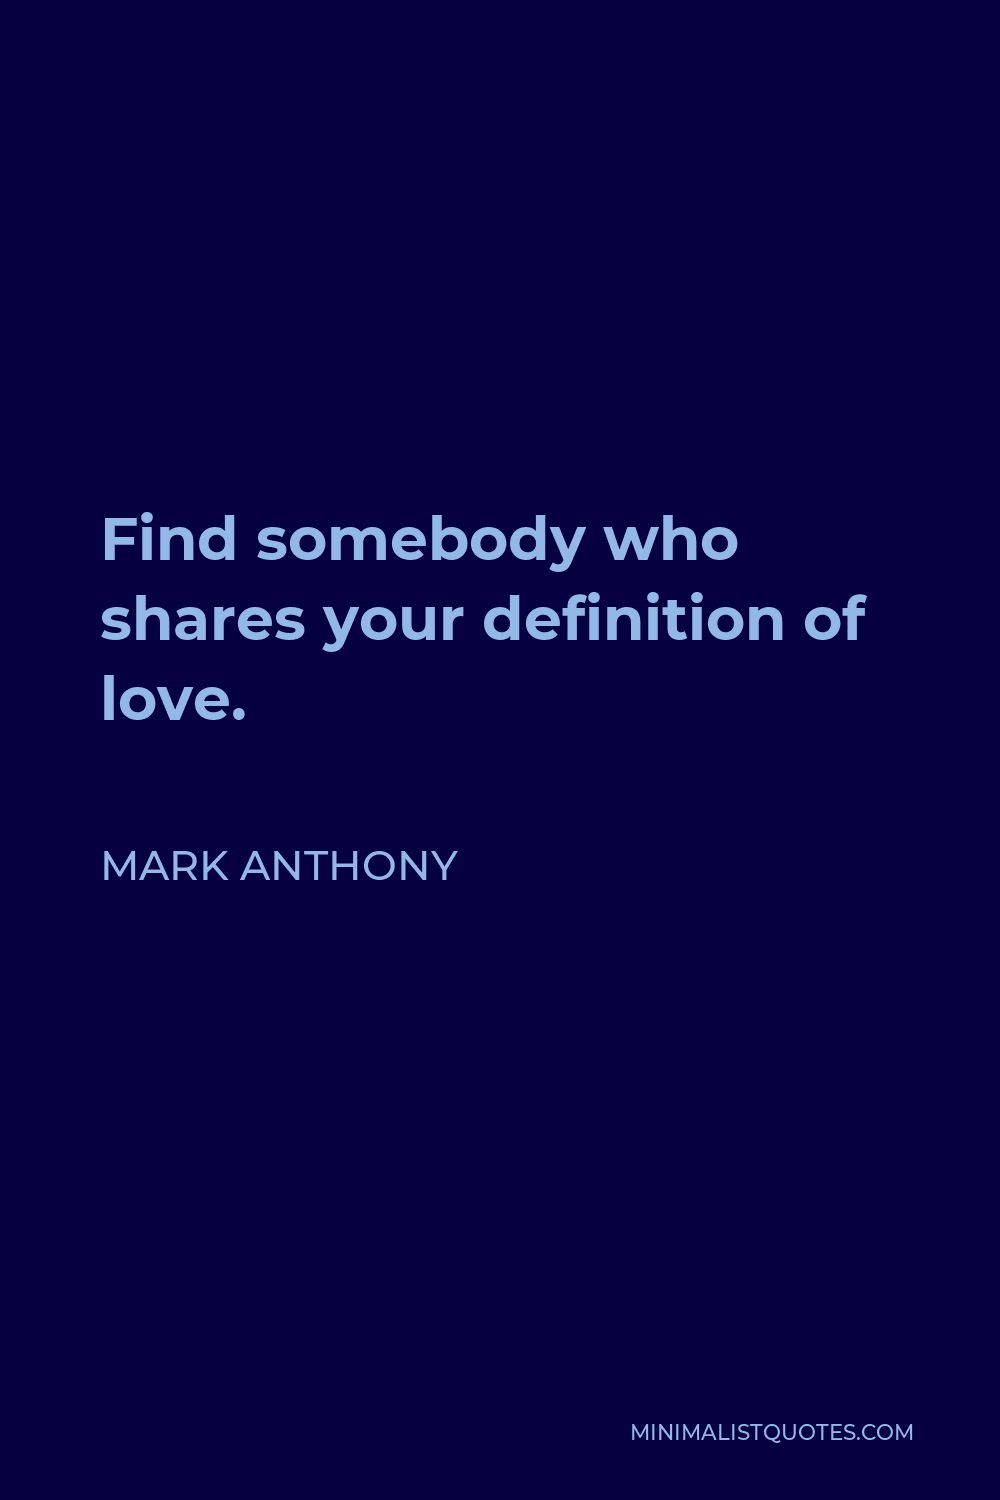 Mark Anthony Quote - Find somebody who shares your definition of love.